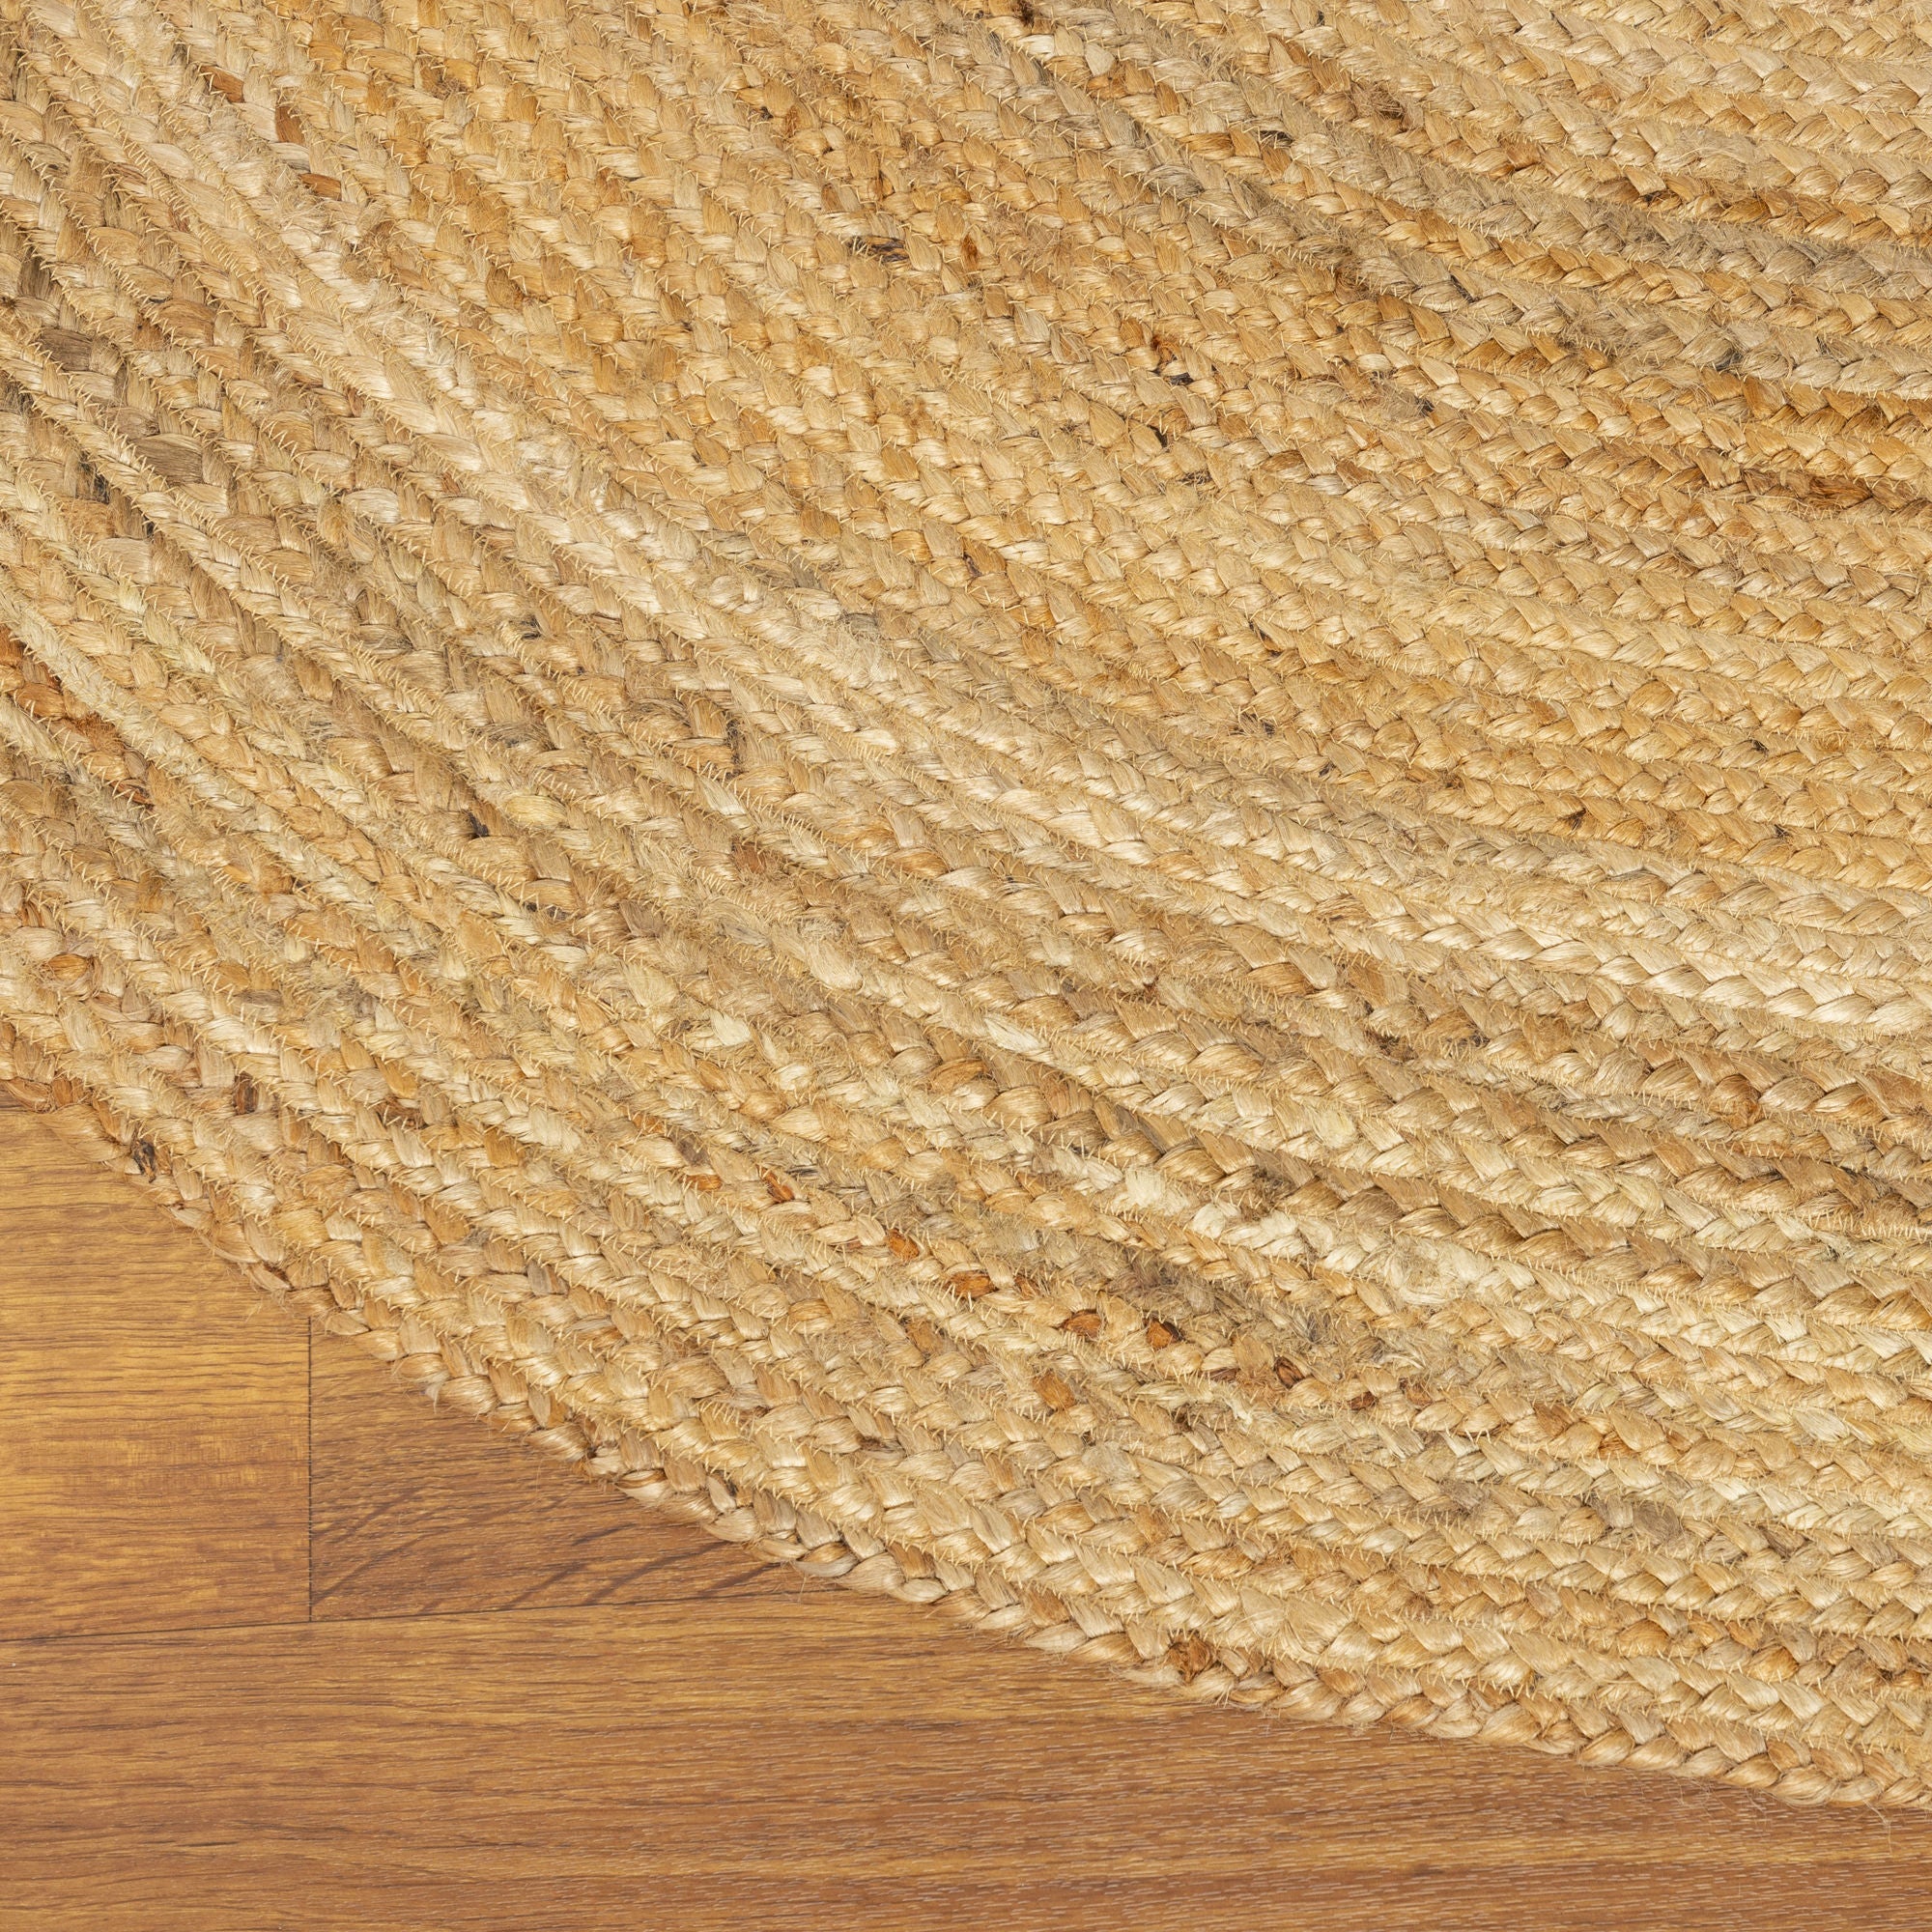 Eco-Friendly Natural Jute Braided Area Rug in Natural #color_natural